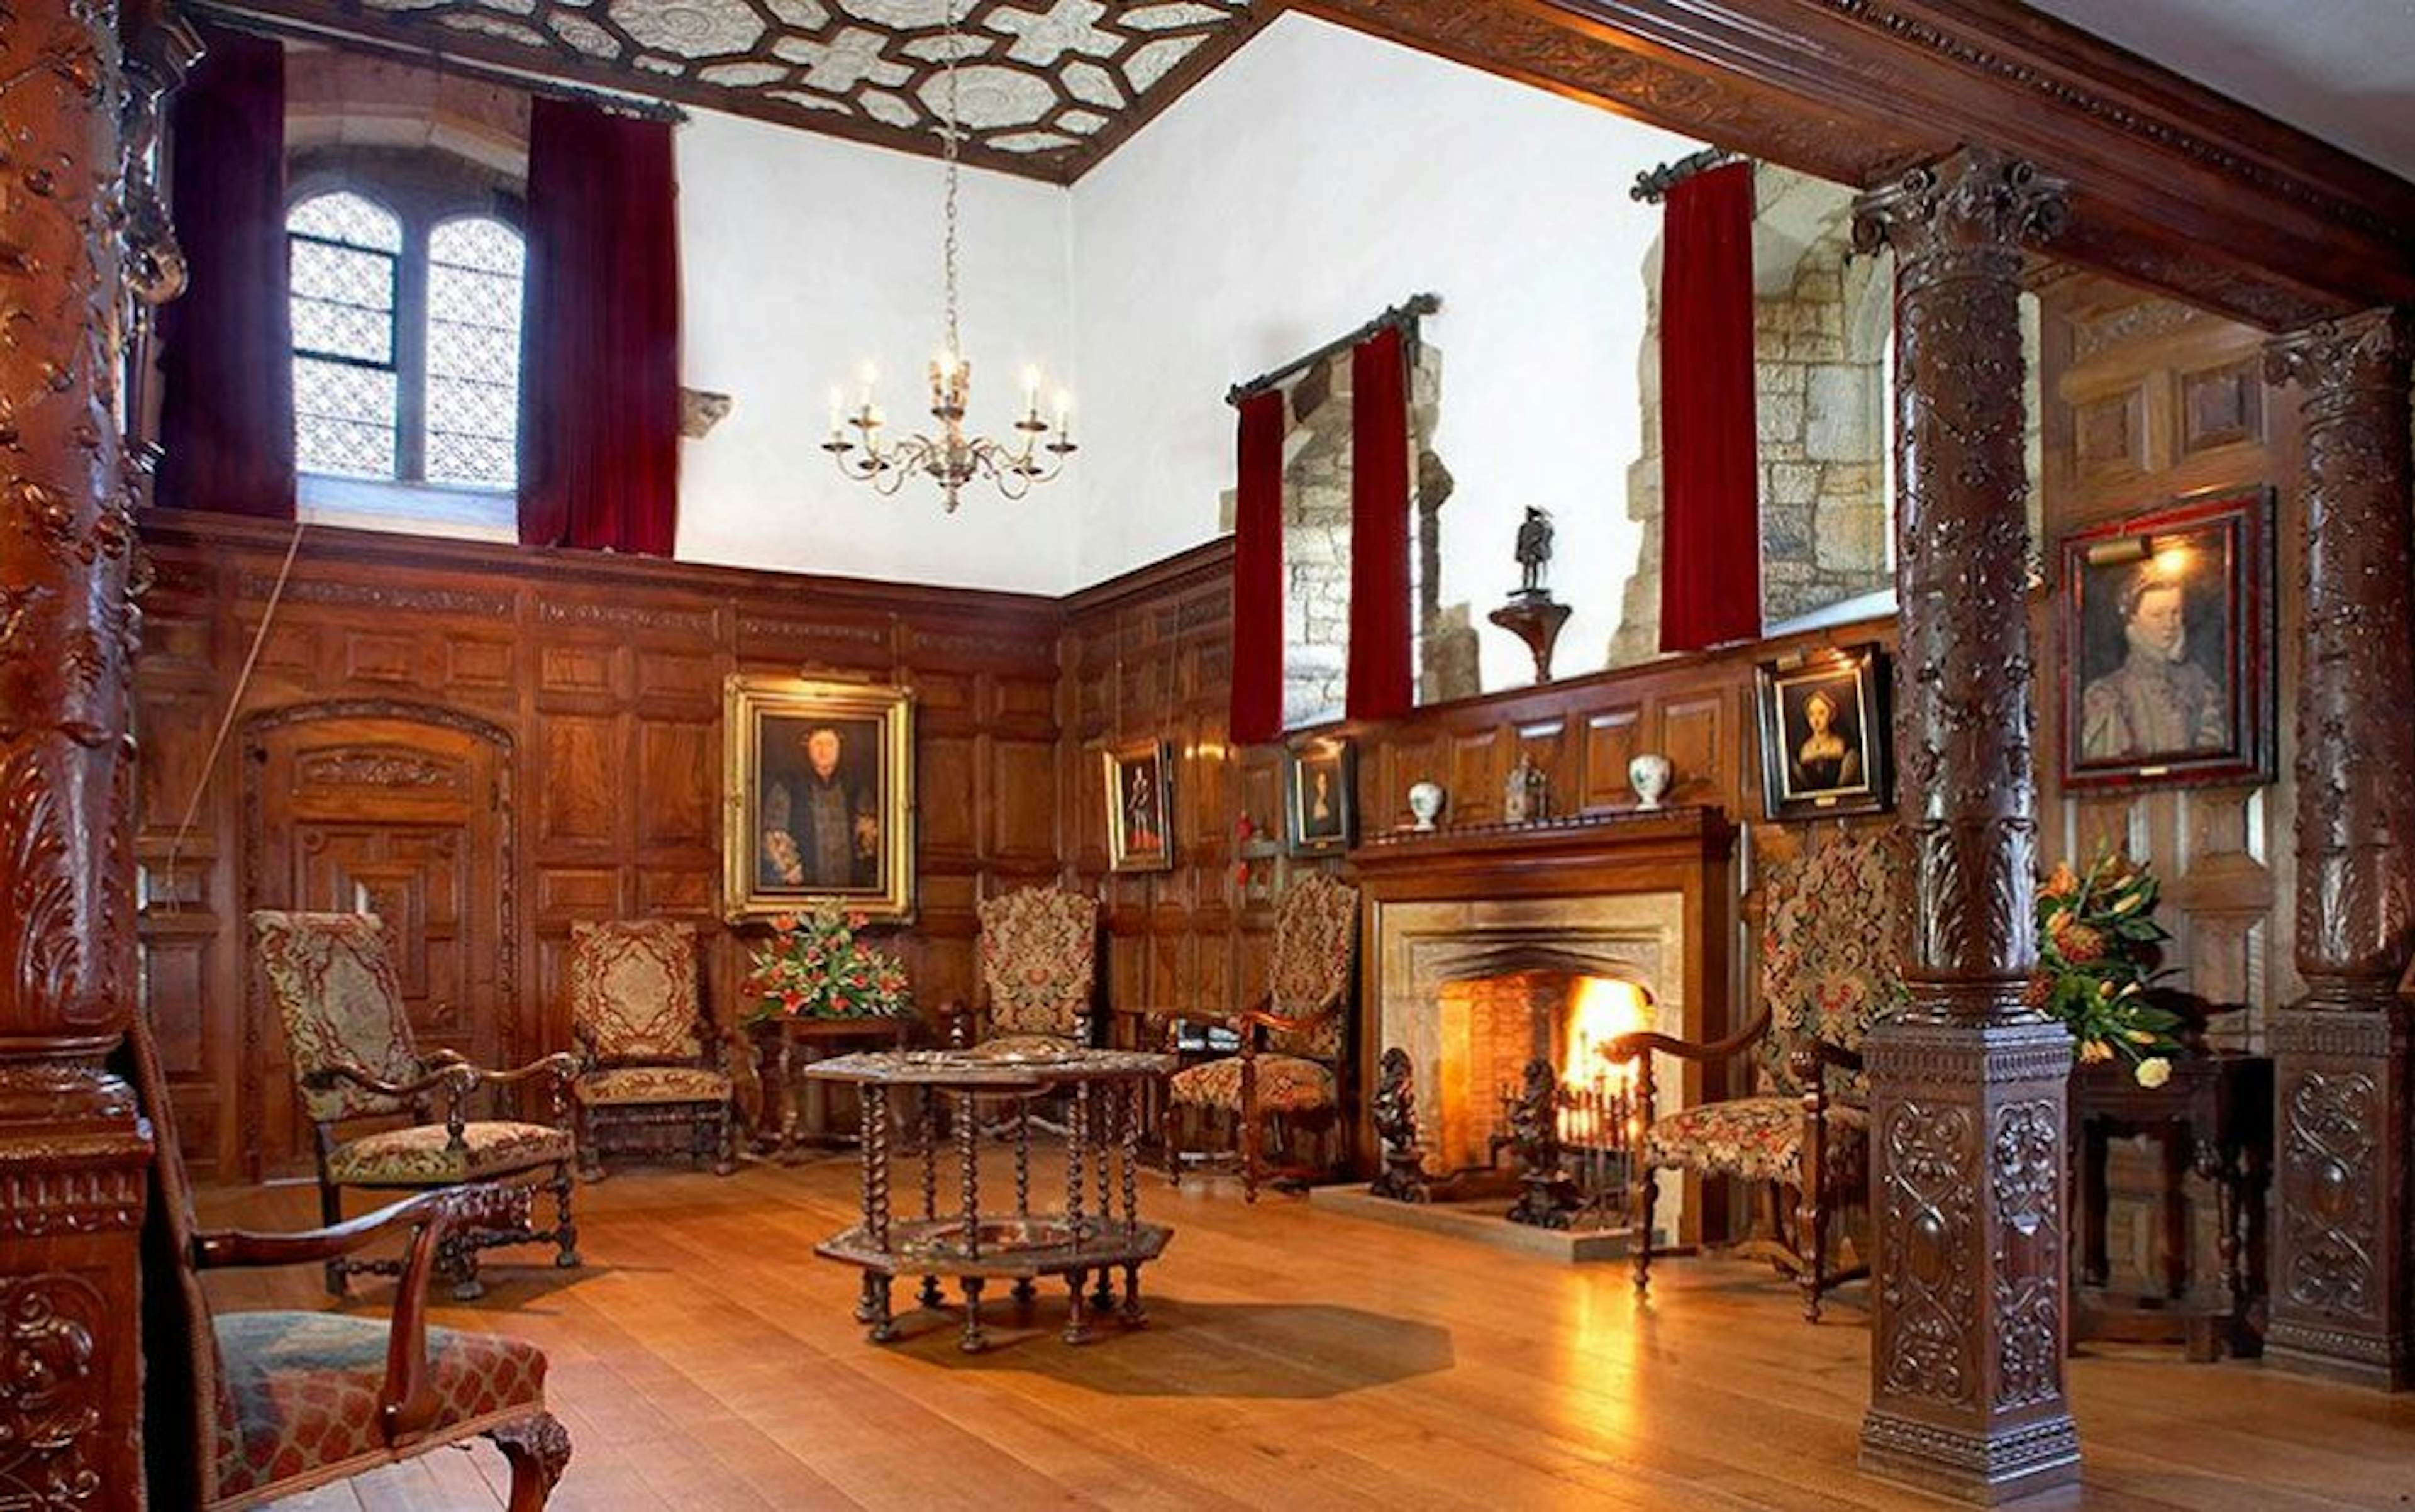 Hever Castle - The Astor Wing image 1